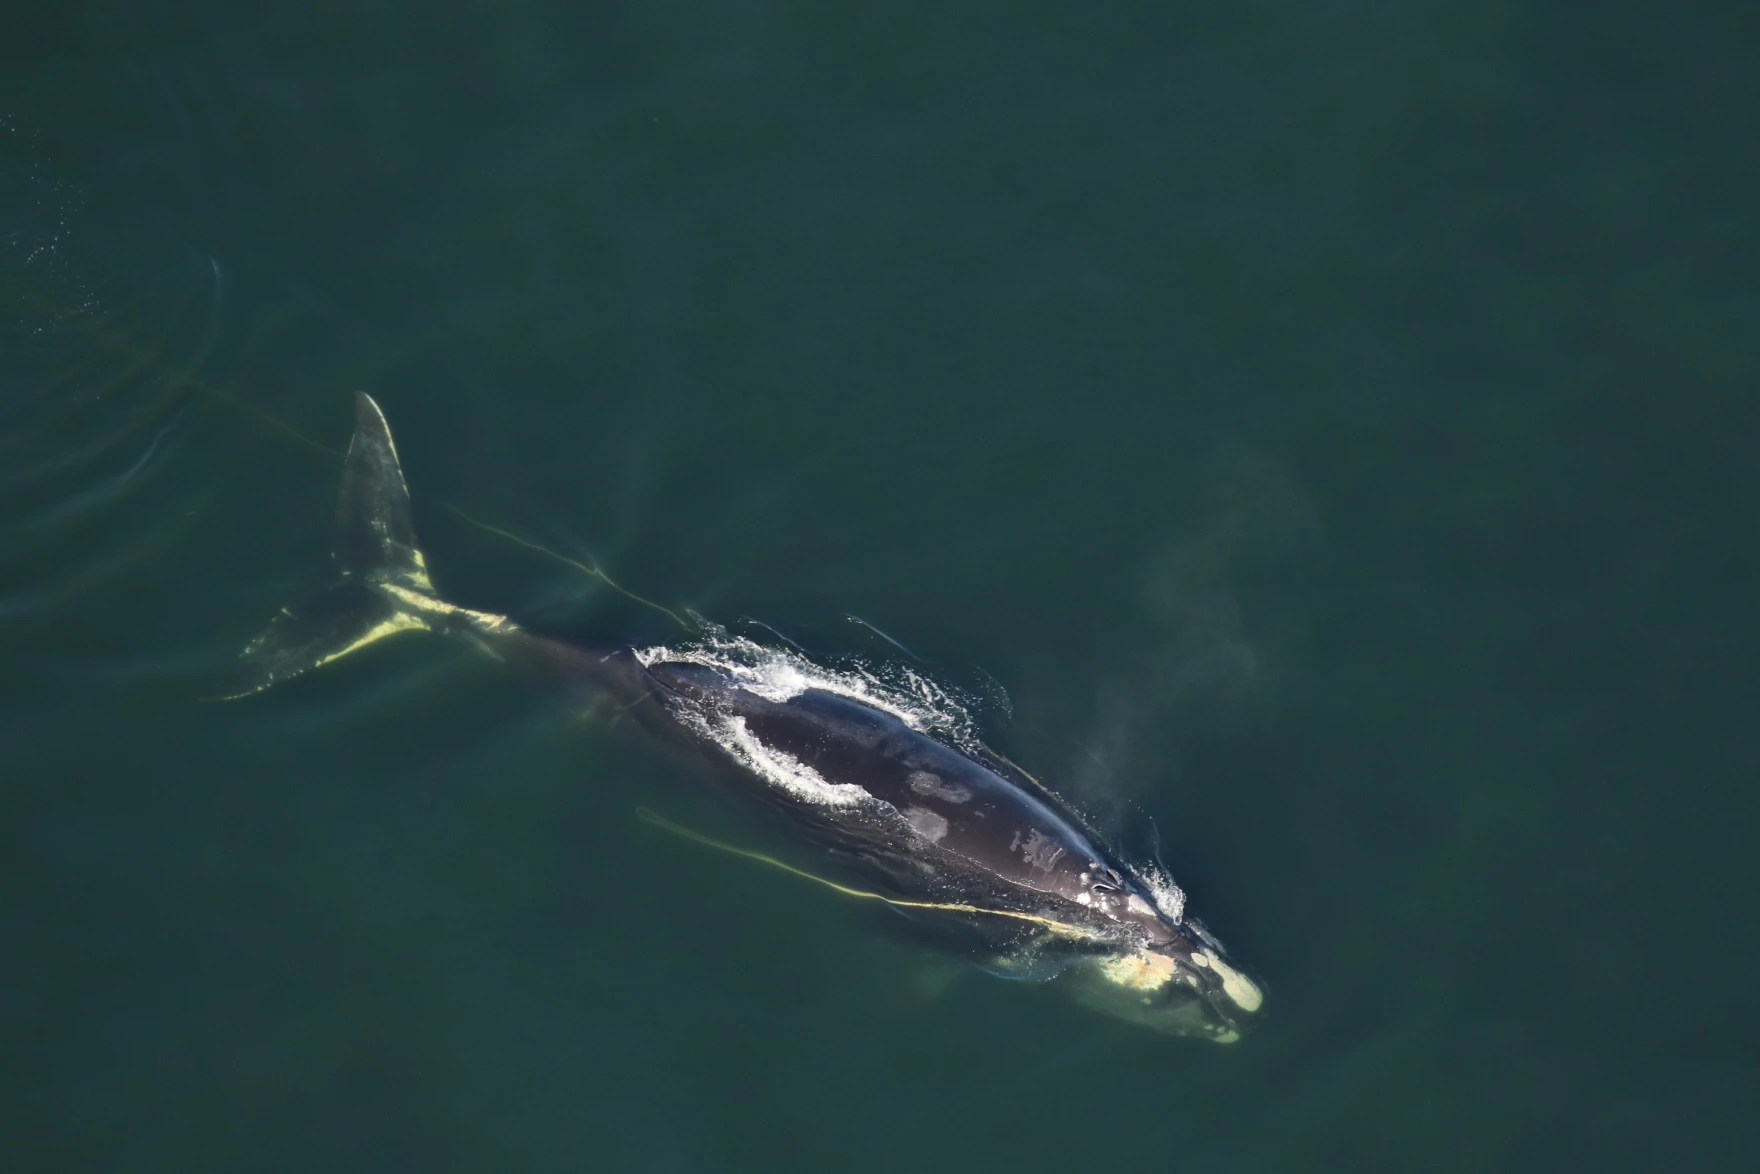 A 15-year-old North Atlantic right whale named Nimbus was spotted off the Georgia coast on Jan. 20, 2023 with 375 feet of fishing line entangled in his mouth and dragging behind his flukes.